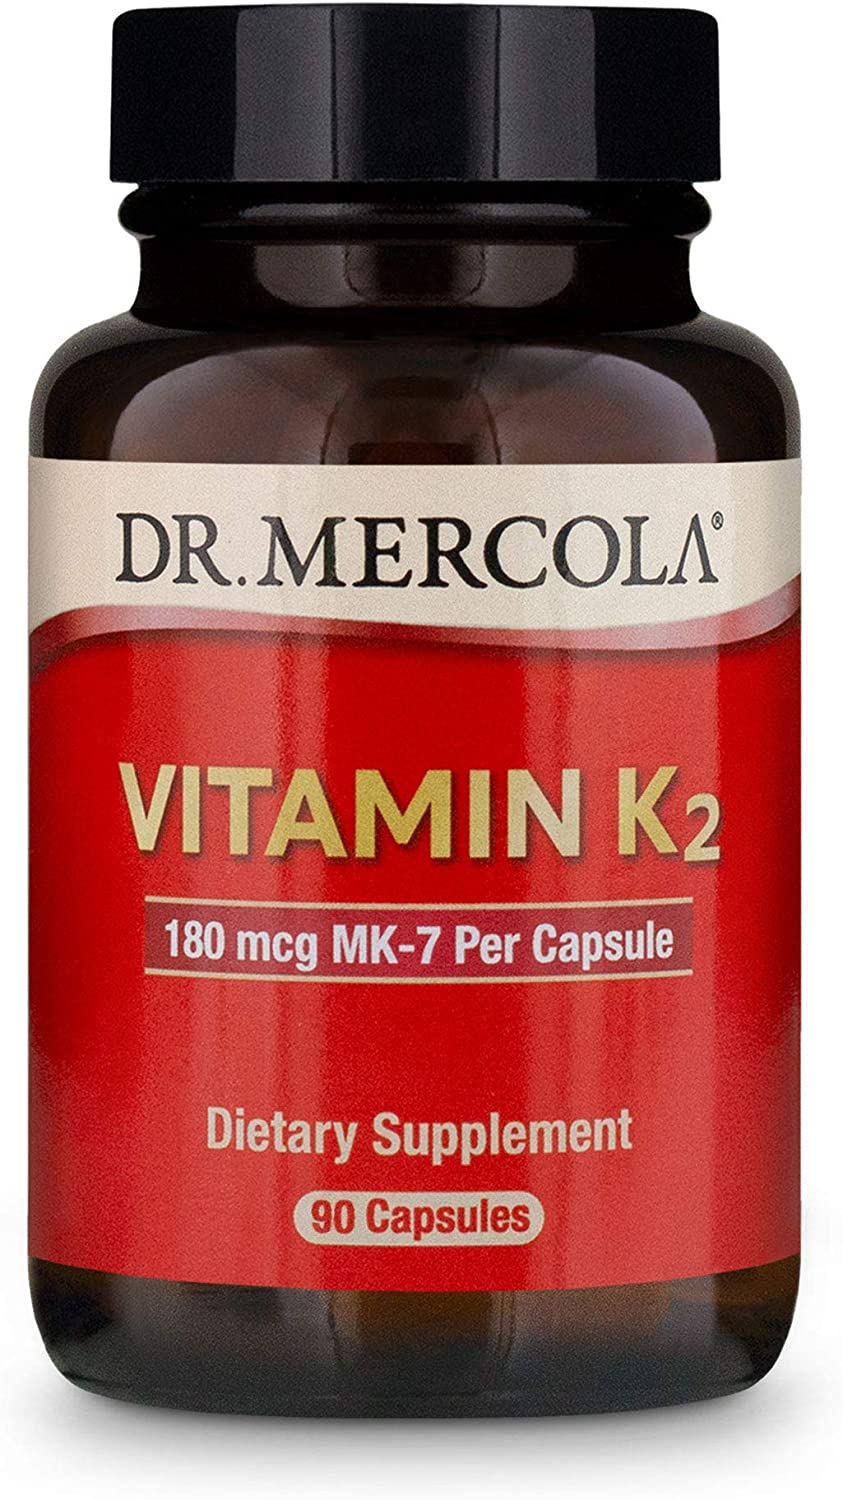 Dr. Mercola, Vitamin K2 Dietary Dietary Supplement, 90 Servings (90 Capsules), Supports Bone and Cardivascular Health, Non GMO, Soy Free, Gluten Free...